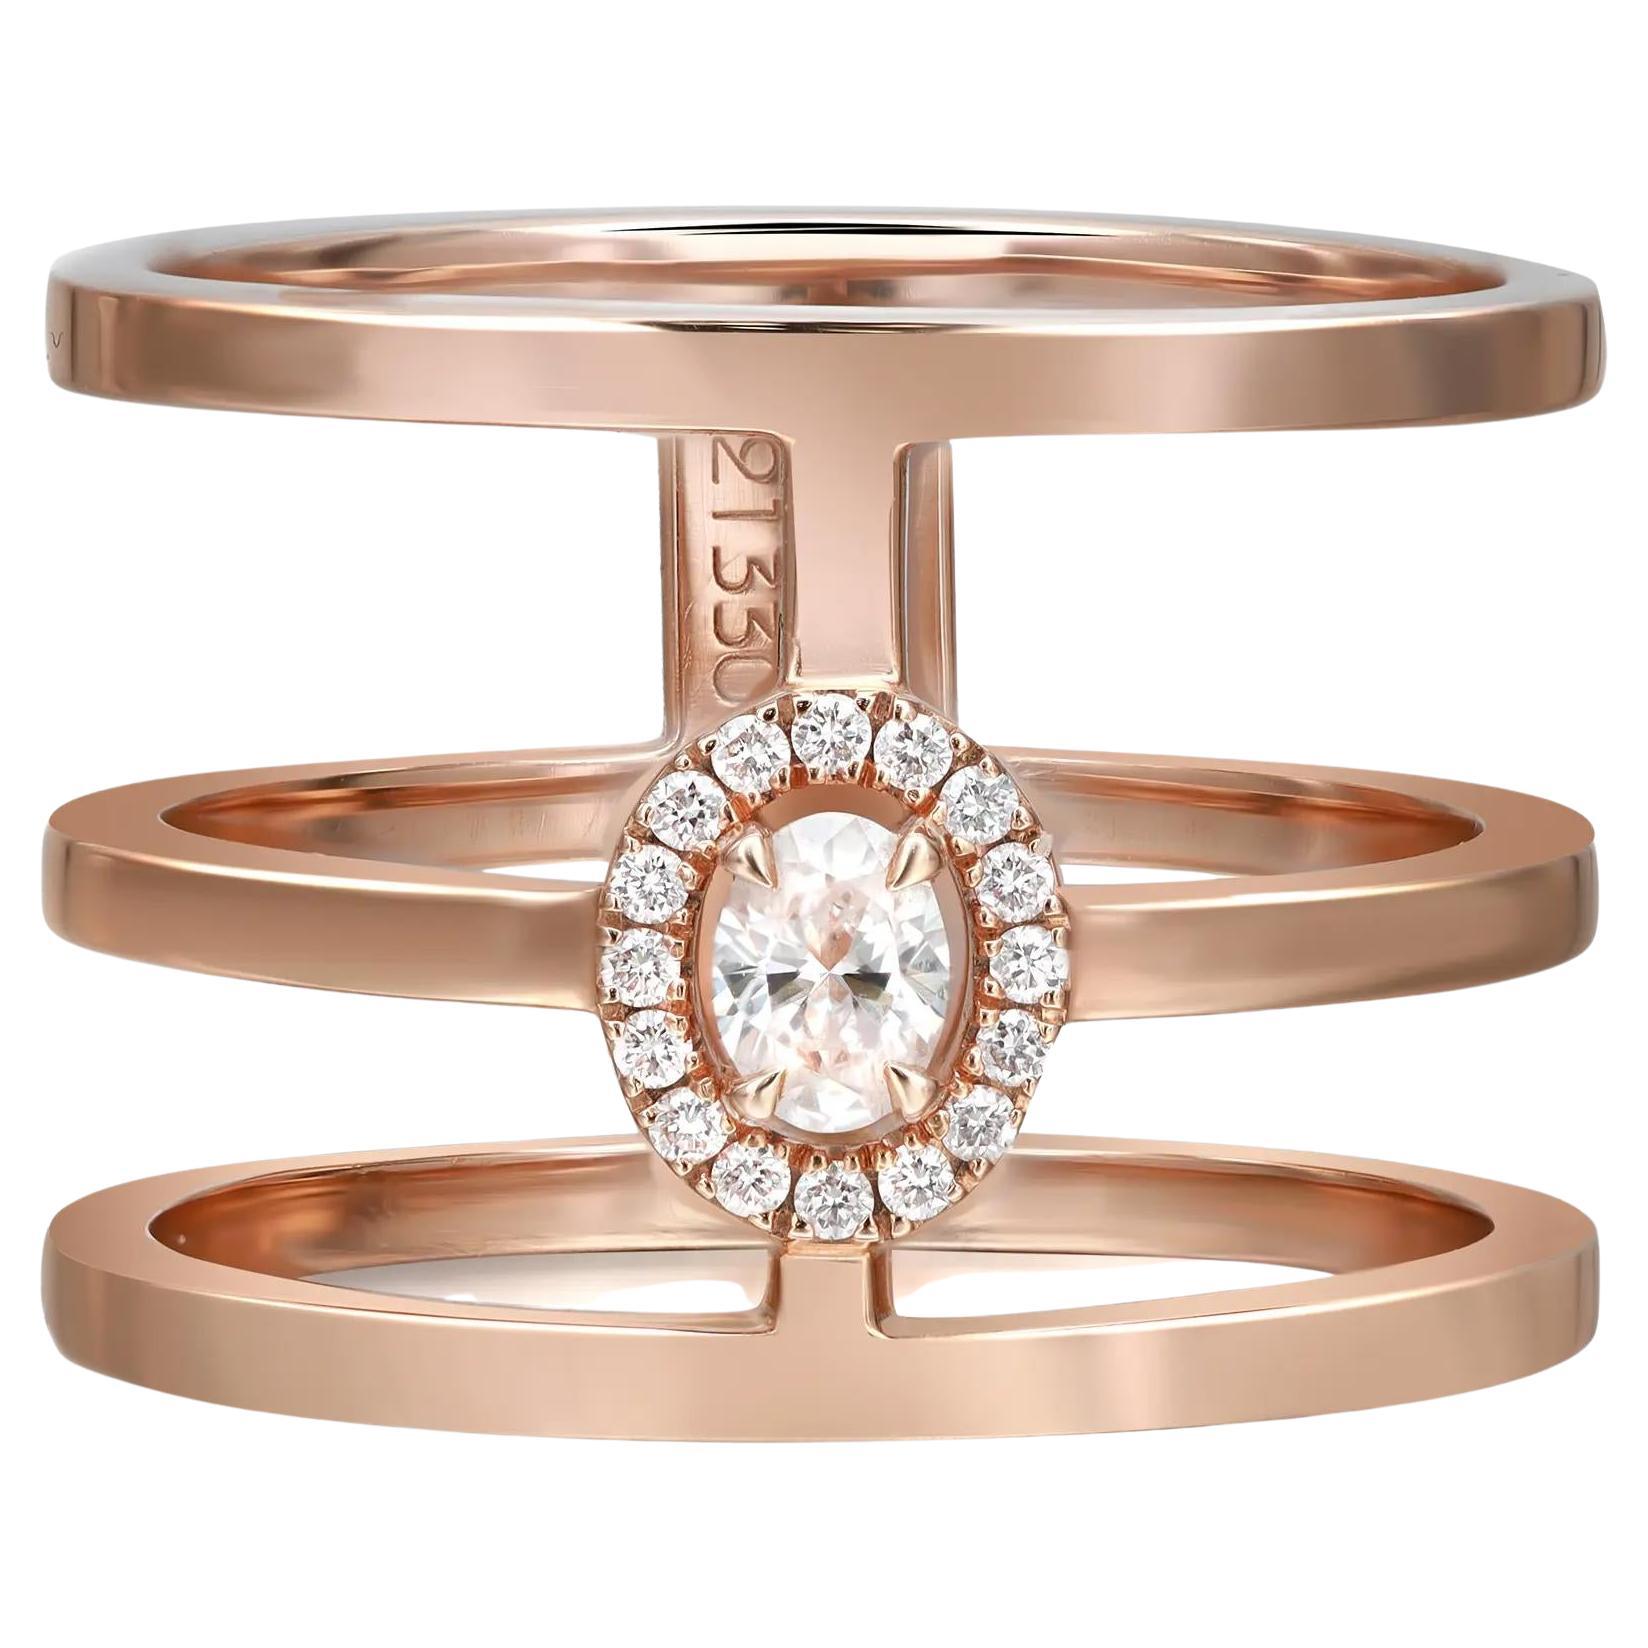 Messika 0.22Cttw Glam'Azone 3 Row Diamond Band Ring 18K Rose Gold Size 54 US 7 For Sale